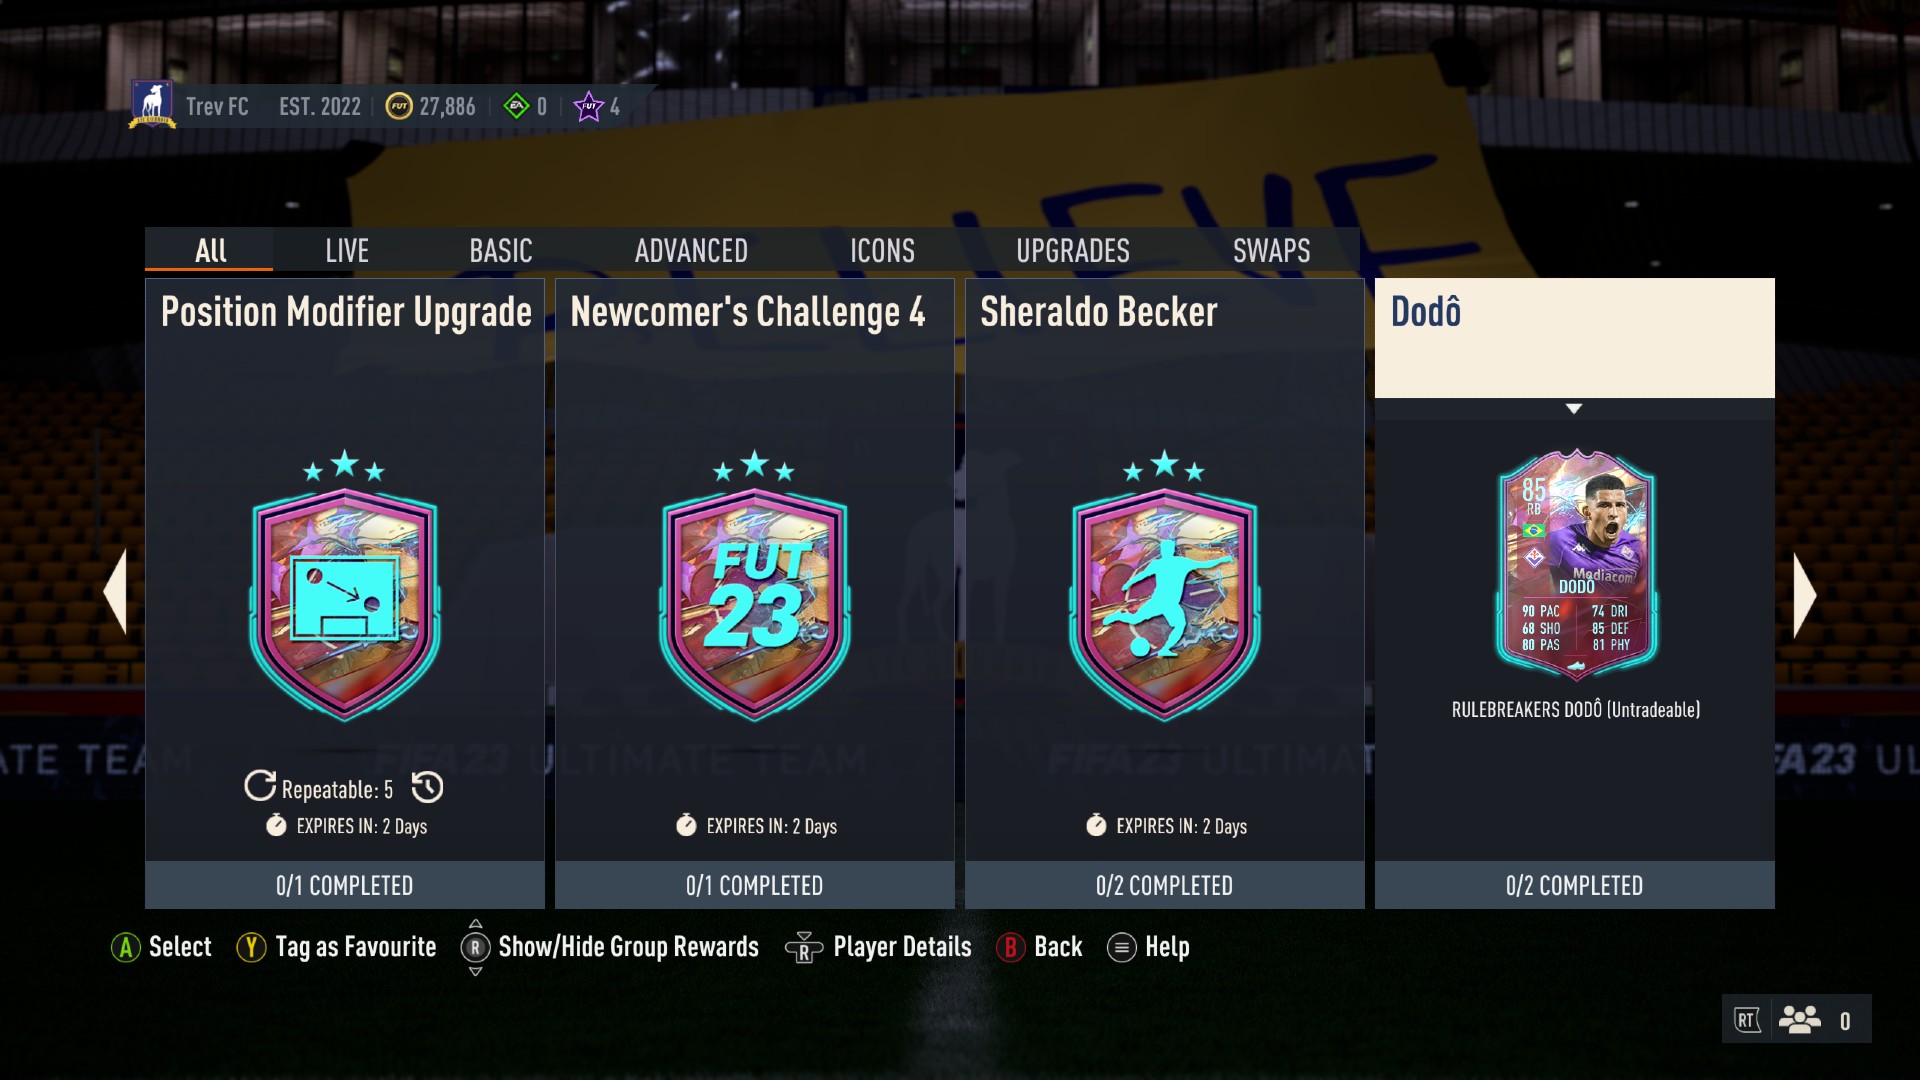 FIFA 23 Web App trading guide: SBCs, investments, tips & more